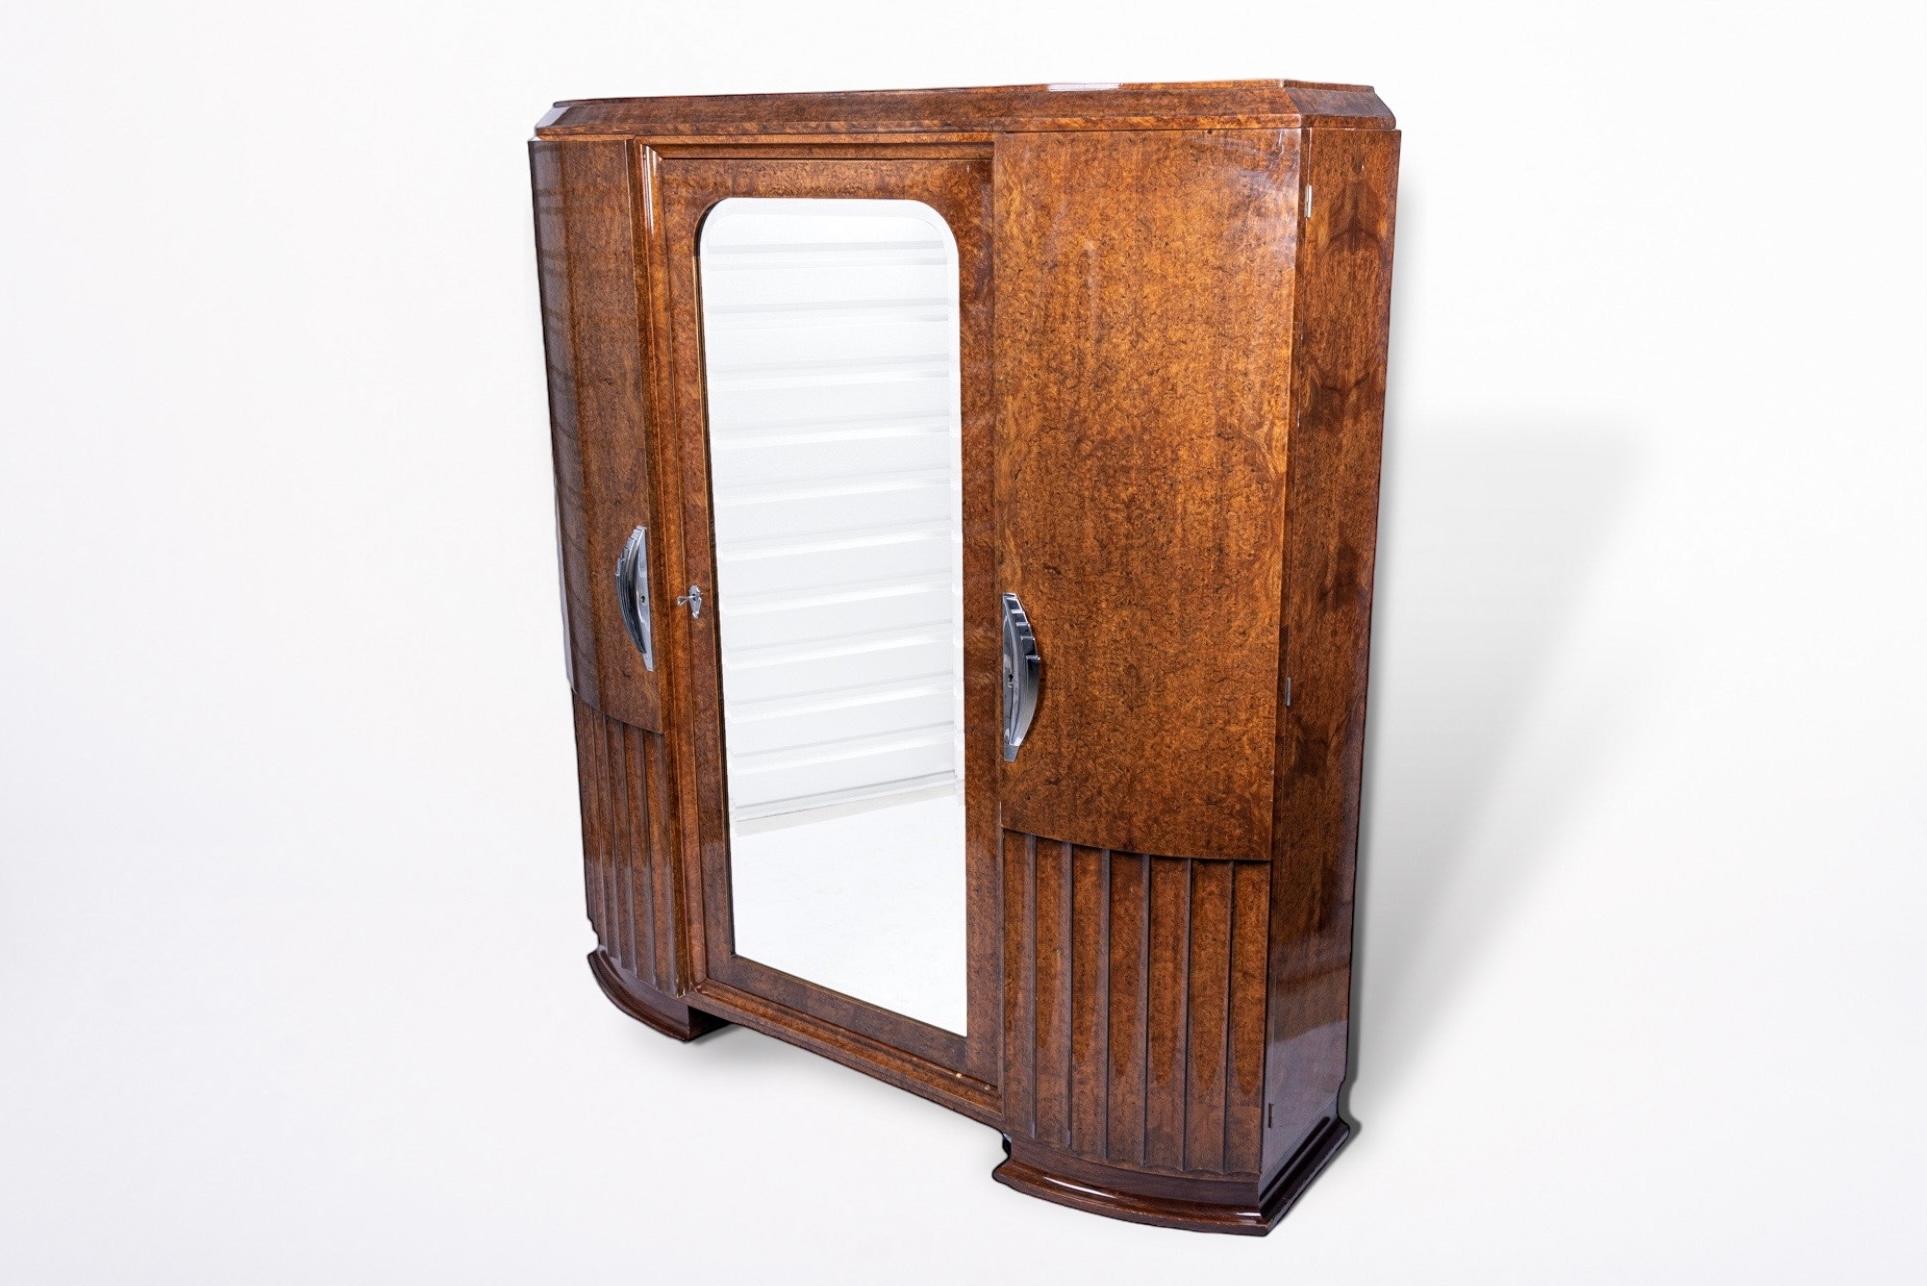 This incredible antique Art Deco lacquered wood armoire wardrobe cabinet is circa 1930. It is impeccably handcrafted from solid wood and Carpatian elm burl wood veneer with gorgeous patterning. It features finished interiors and beautiful curves